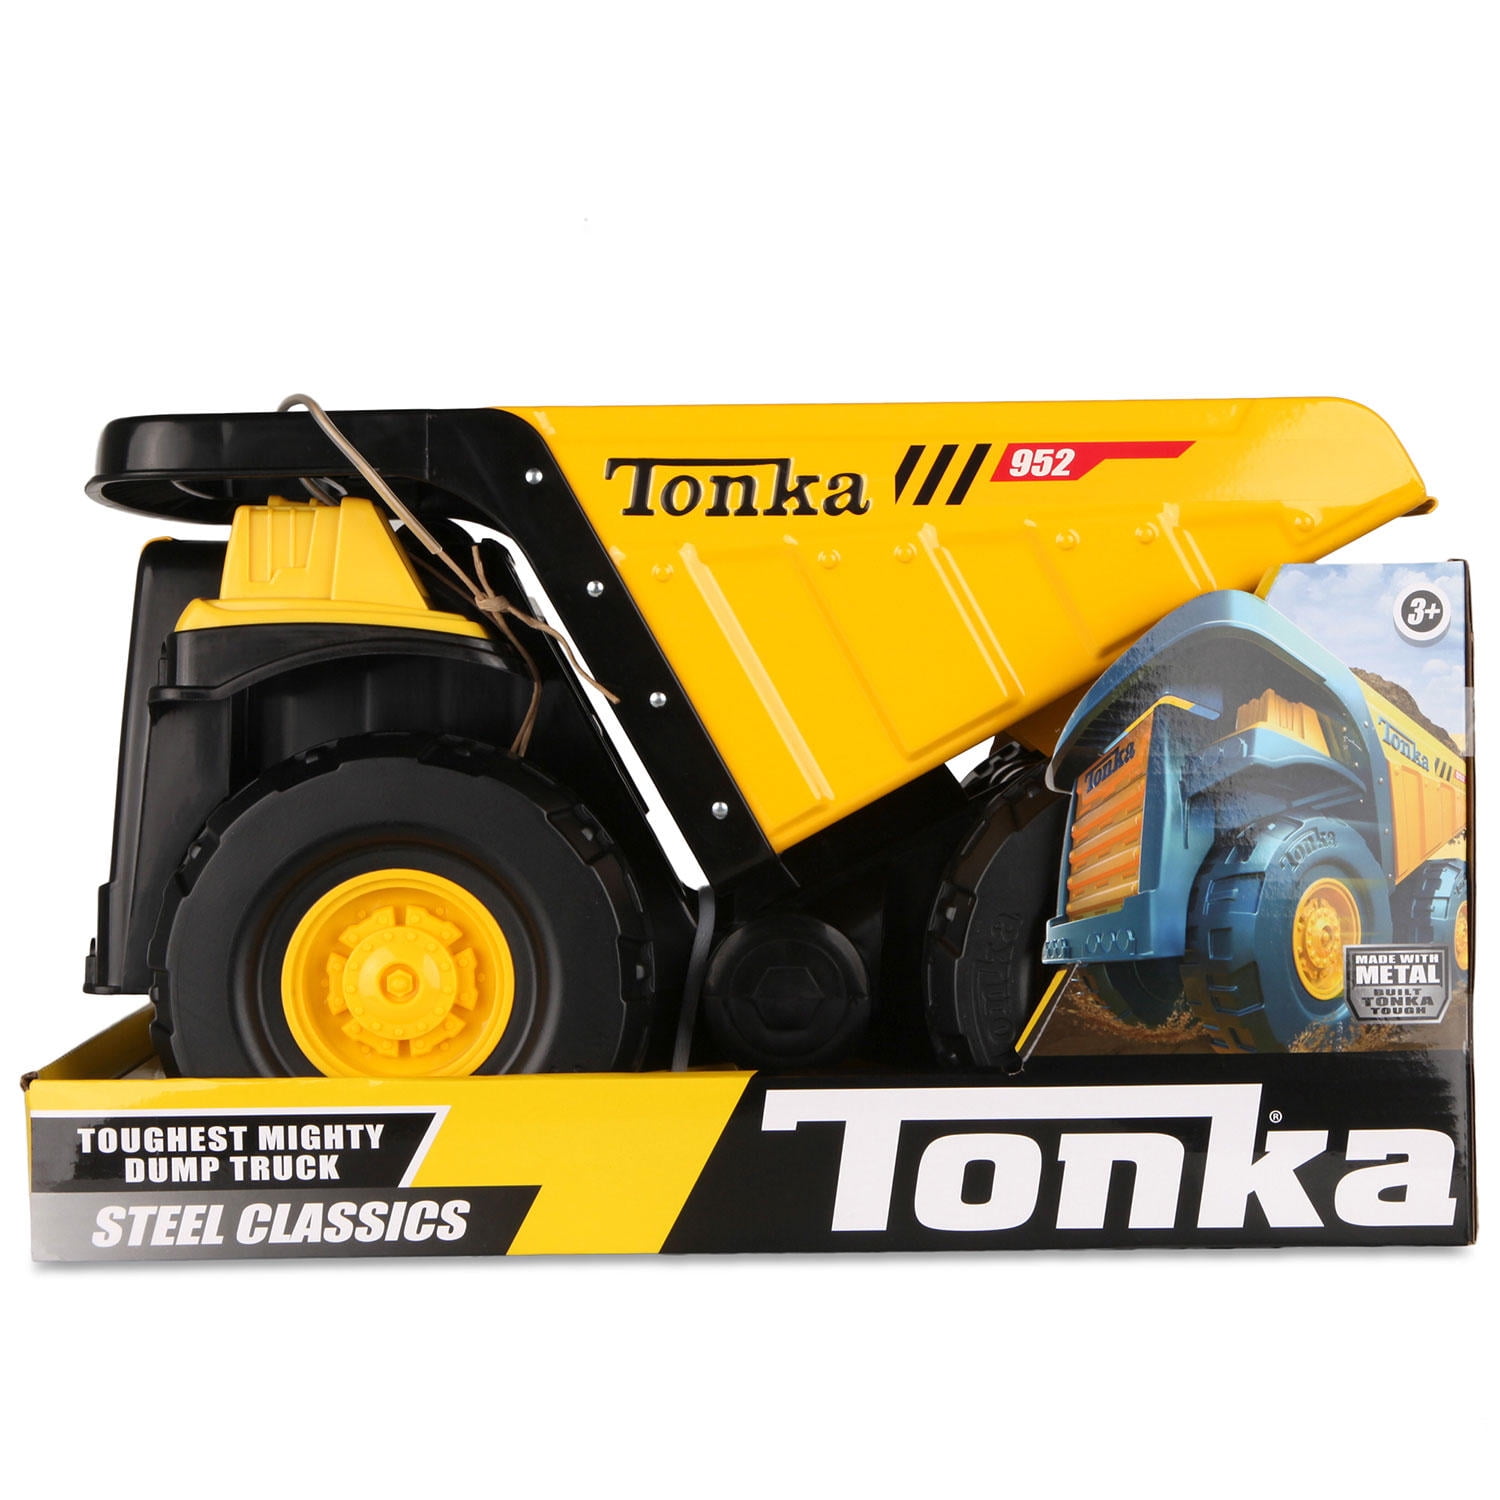 Tonka Mighty Dump Truck Vehicle Classic Steel Toy Construction Kids Play